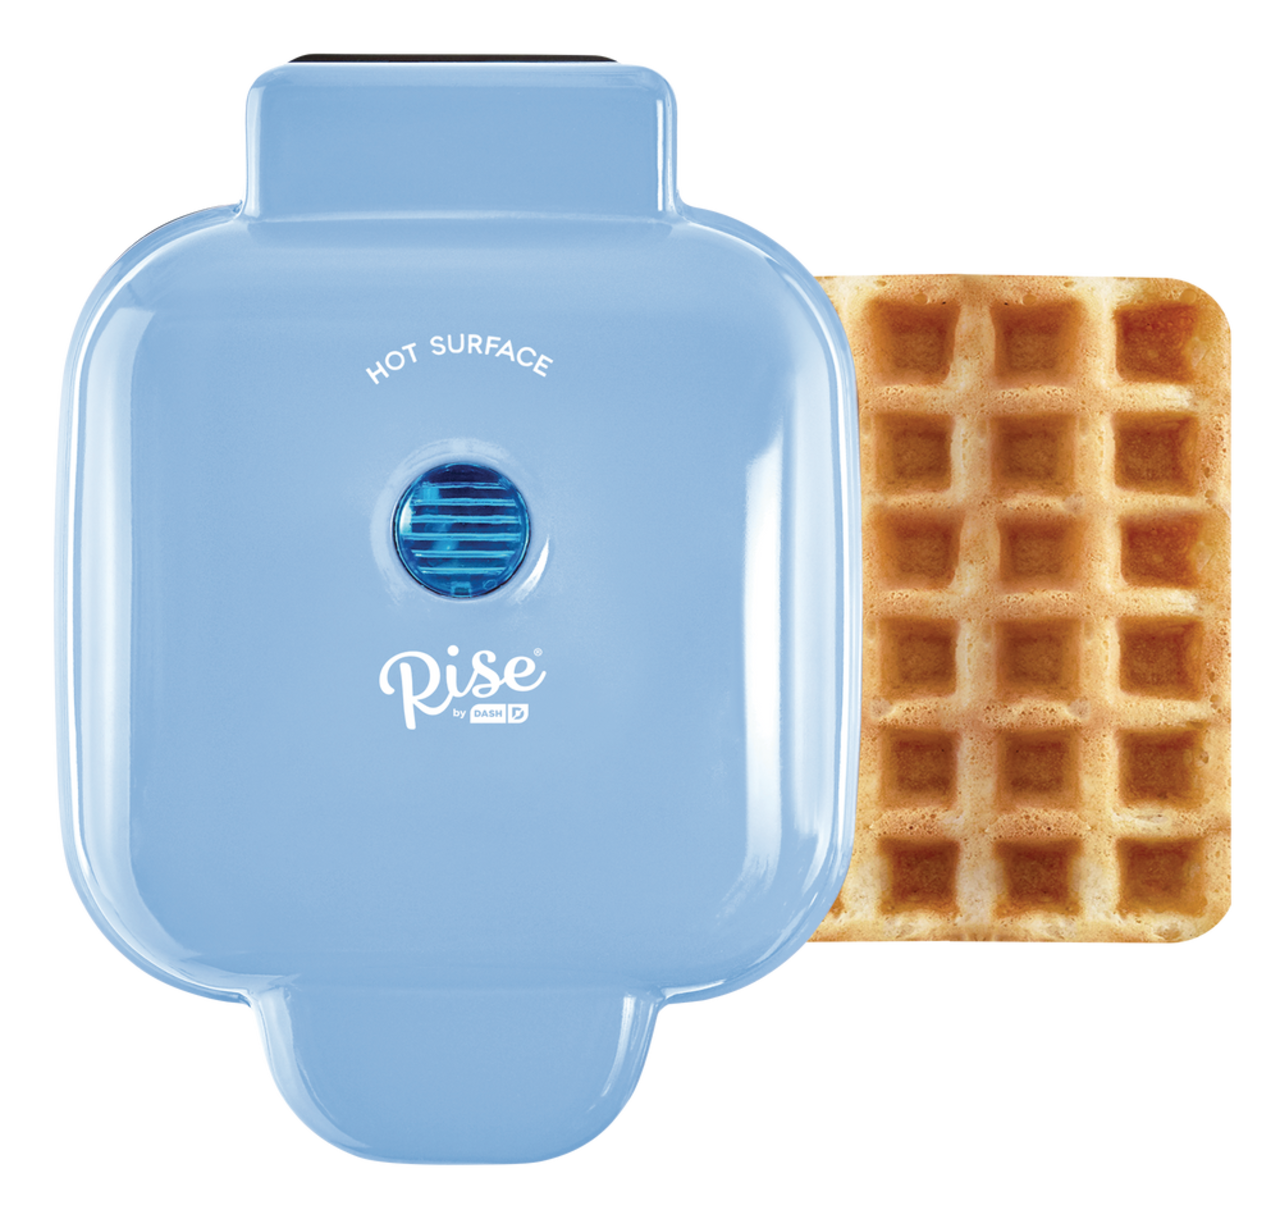 https://media-www.canadiantire.ca/product/living/kitchen/kitchen-appliances/0437058/rise-by-dash-mini-waffle-maker-afb2bf48-c645-4618-9dc9-a0b5bfdf4bdc.png?imdensity=1&imwidth=1244&impolicy=mZoom